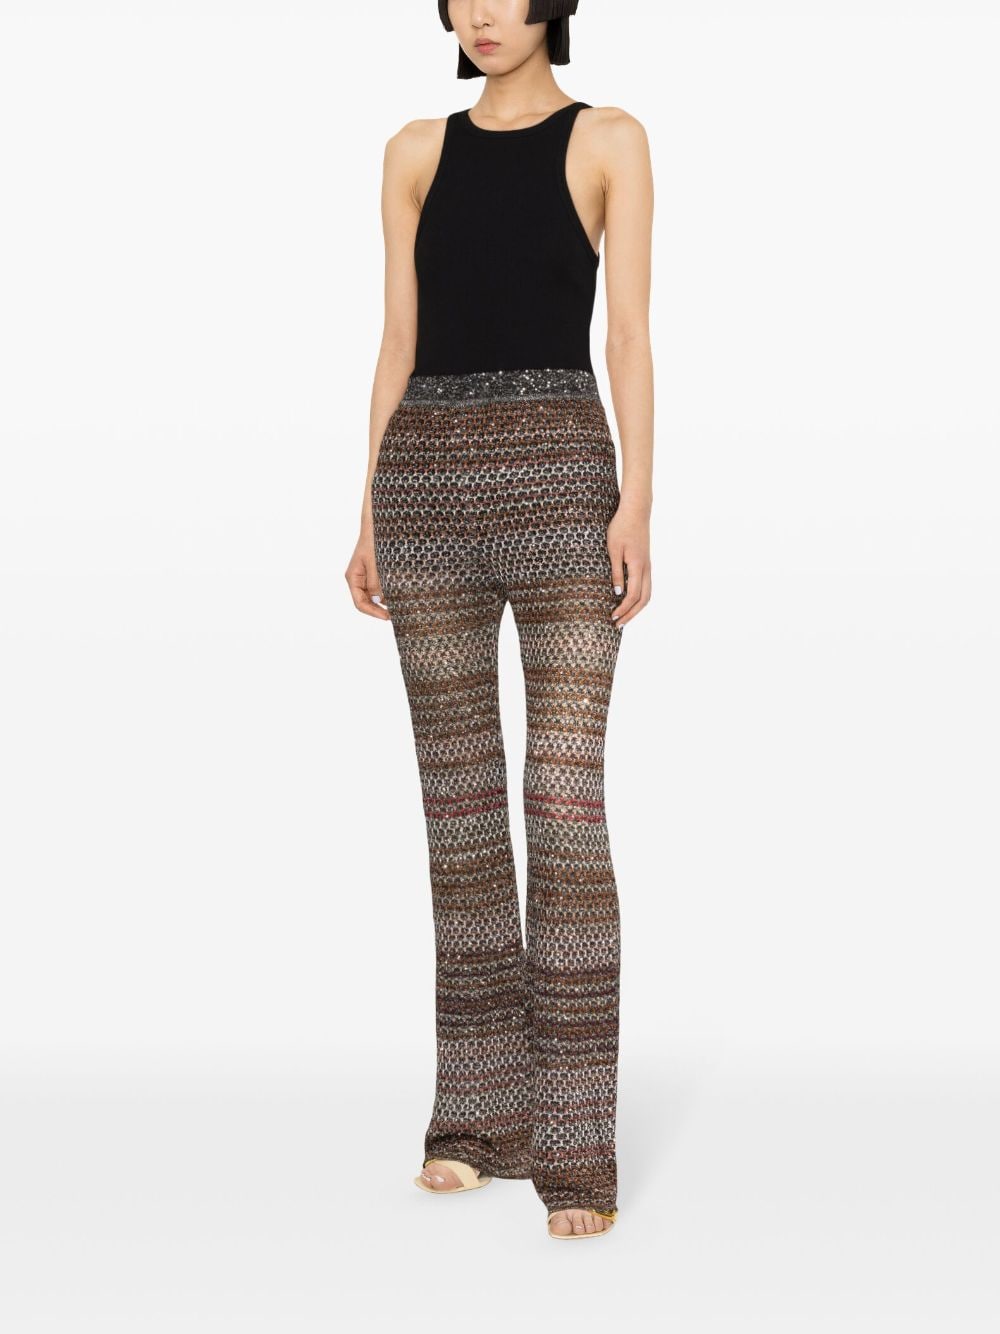 MISSONI High-Waisted Flared Trousers: Black & Multicolor Metallic Honeycomb Knit & Sequin Embellished for Women